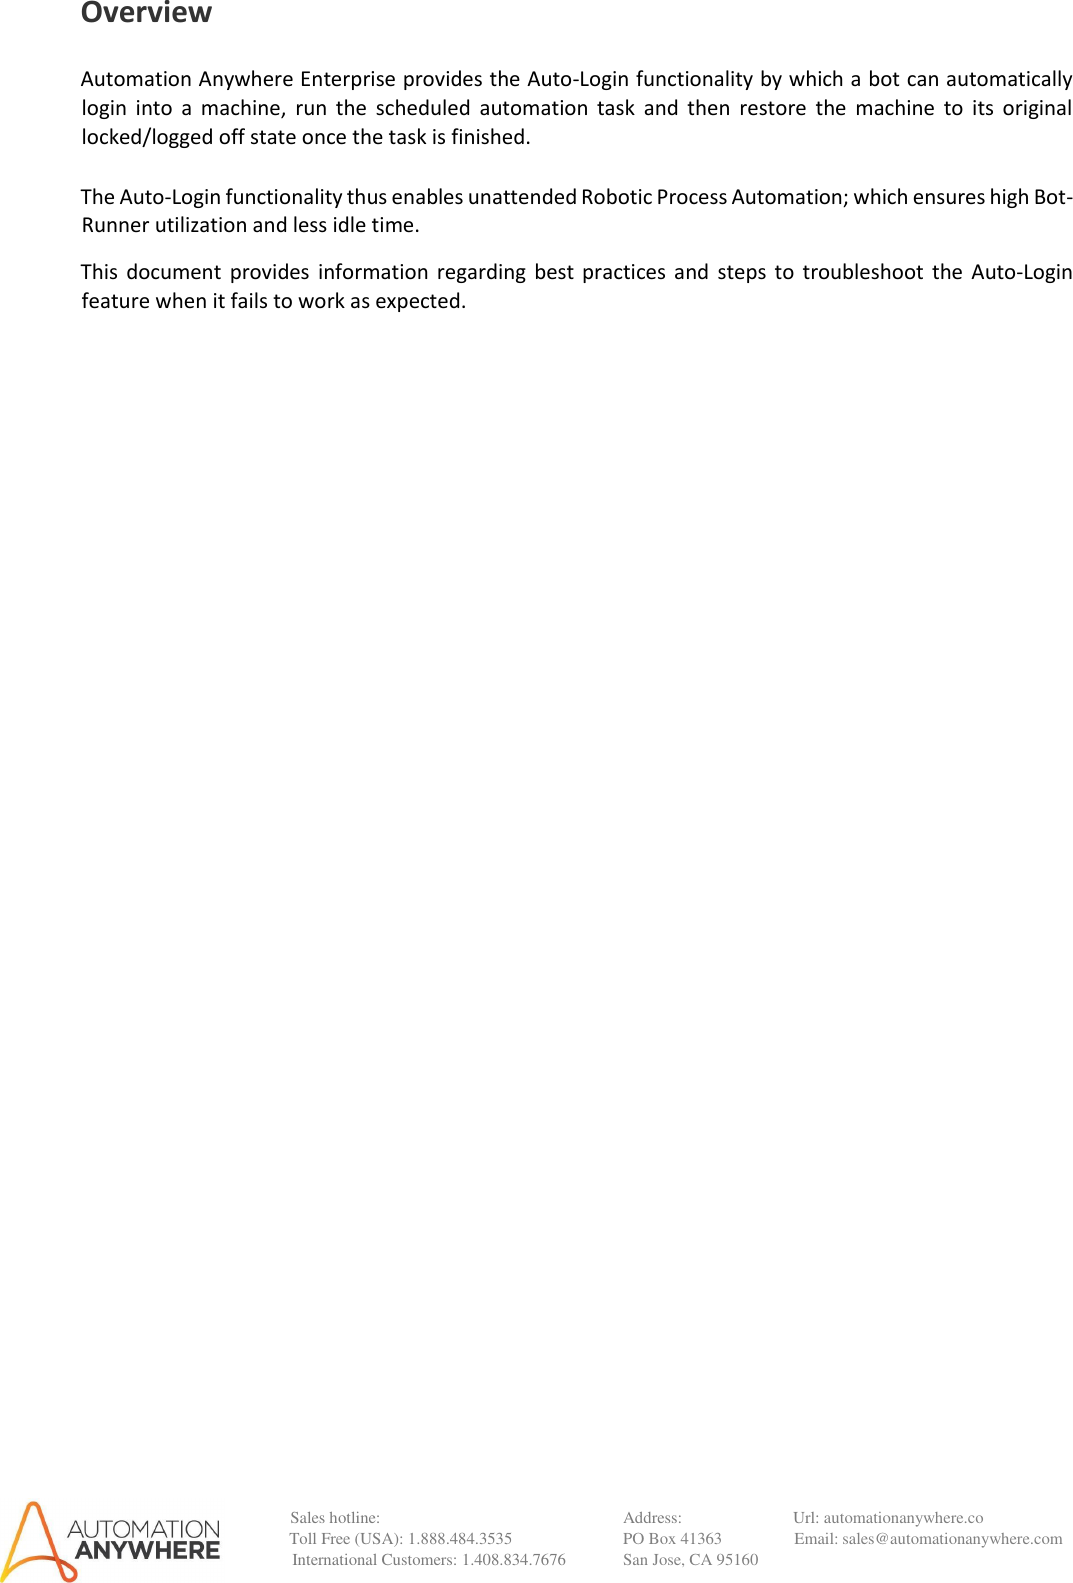 Page 3 of 11 - AAE Auto Login Best Practice Troubleshooting Guide[1]